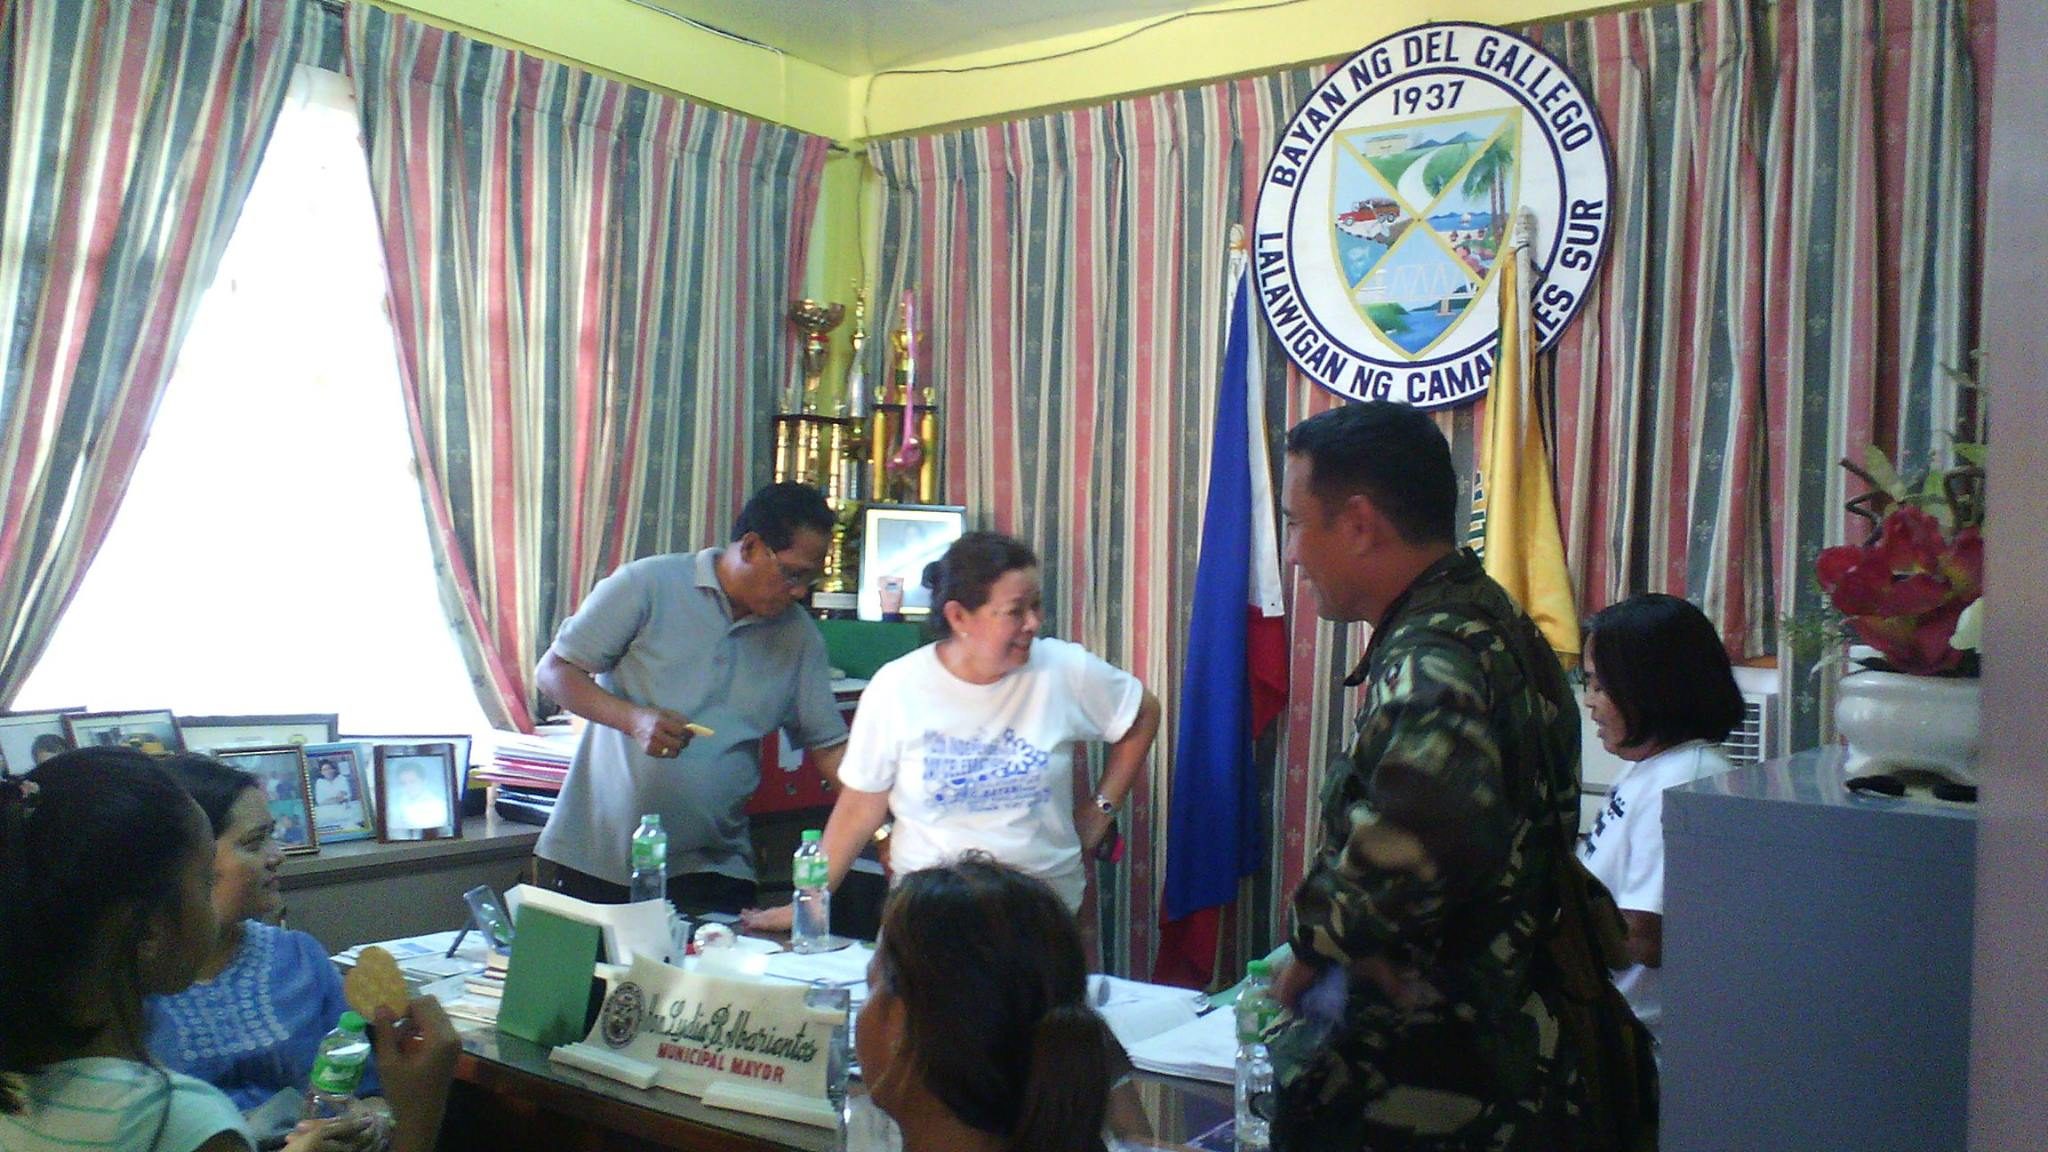 CRISIS AVERTED. Del Gallego Mayor Lydia Abarientos gets a positive update on the hostage-taking incident in her town on May 29, 2015. Photo by Reden Devilla  